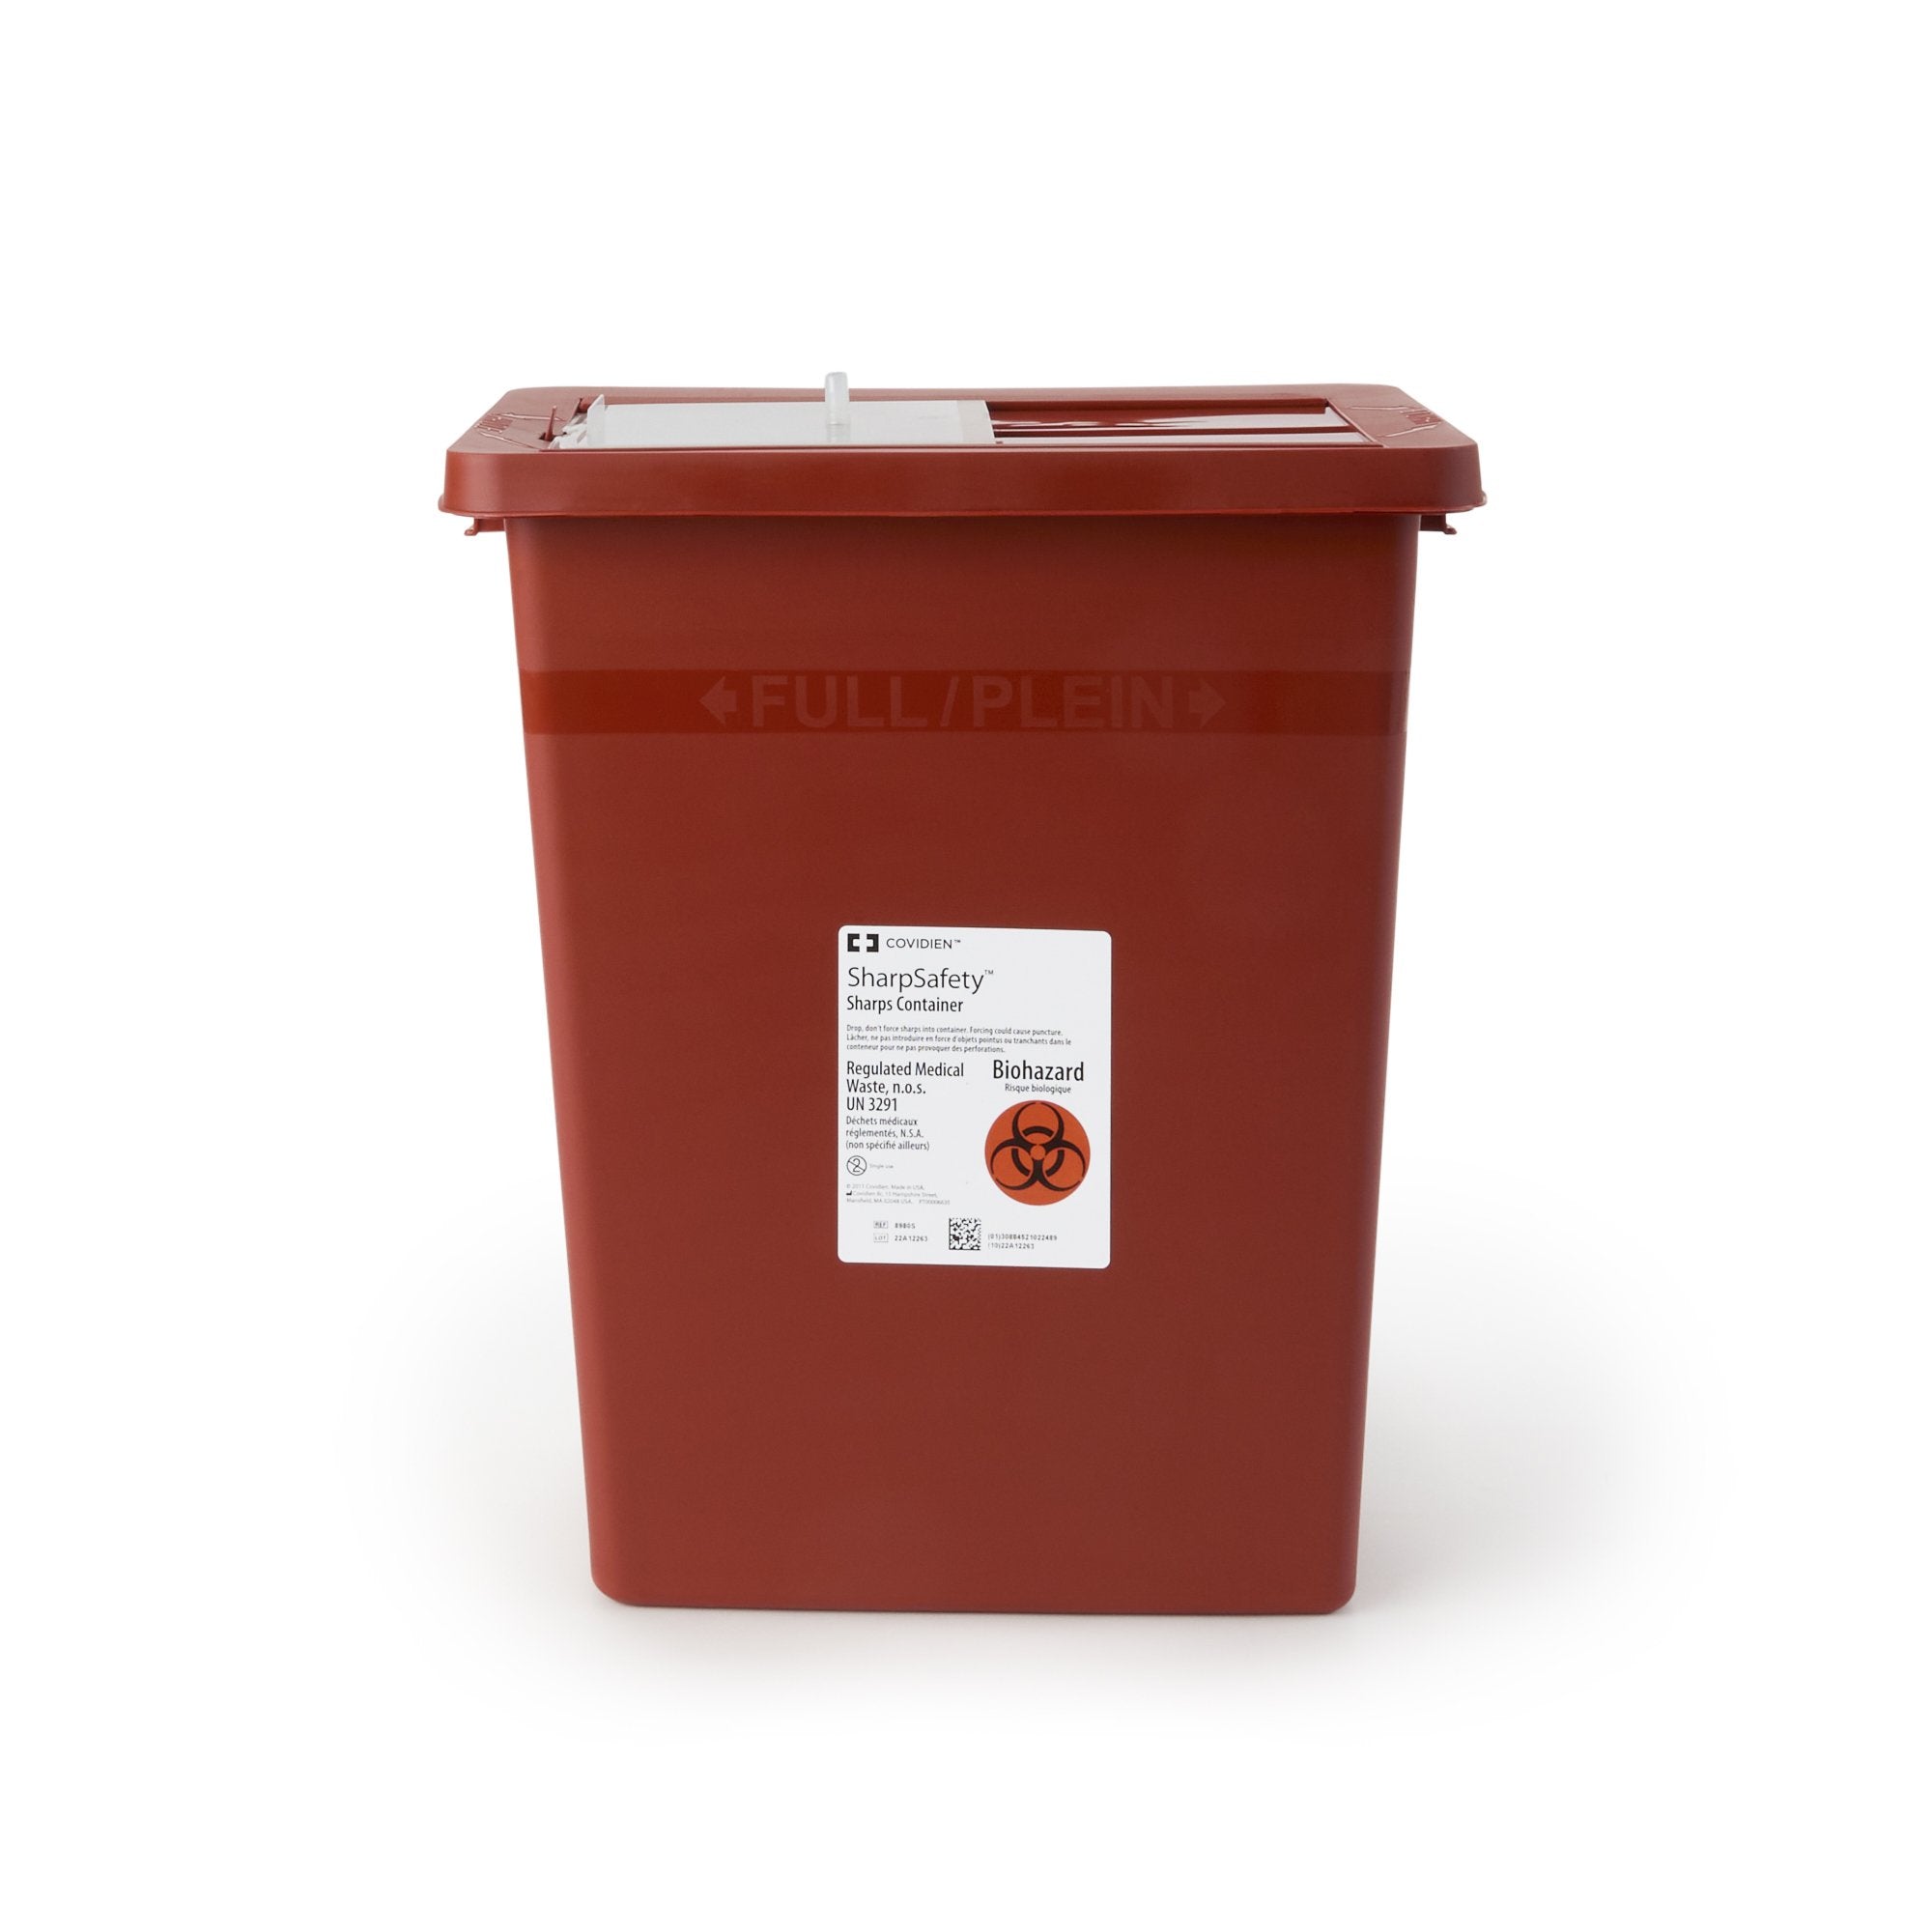 Sharps Container SharpSafety Red Base 17-3/4 H X 11 W X 15-1/2 D Inch Vertical Entry 8 Gallon